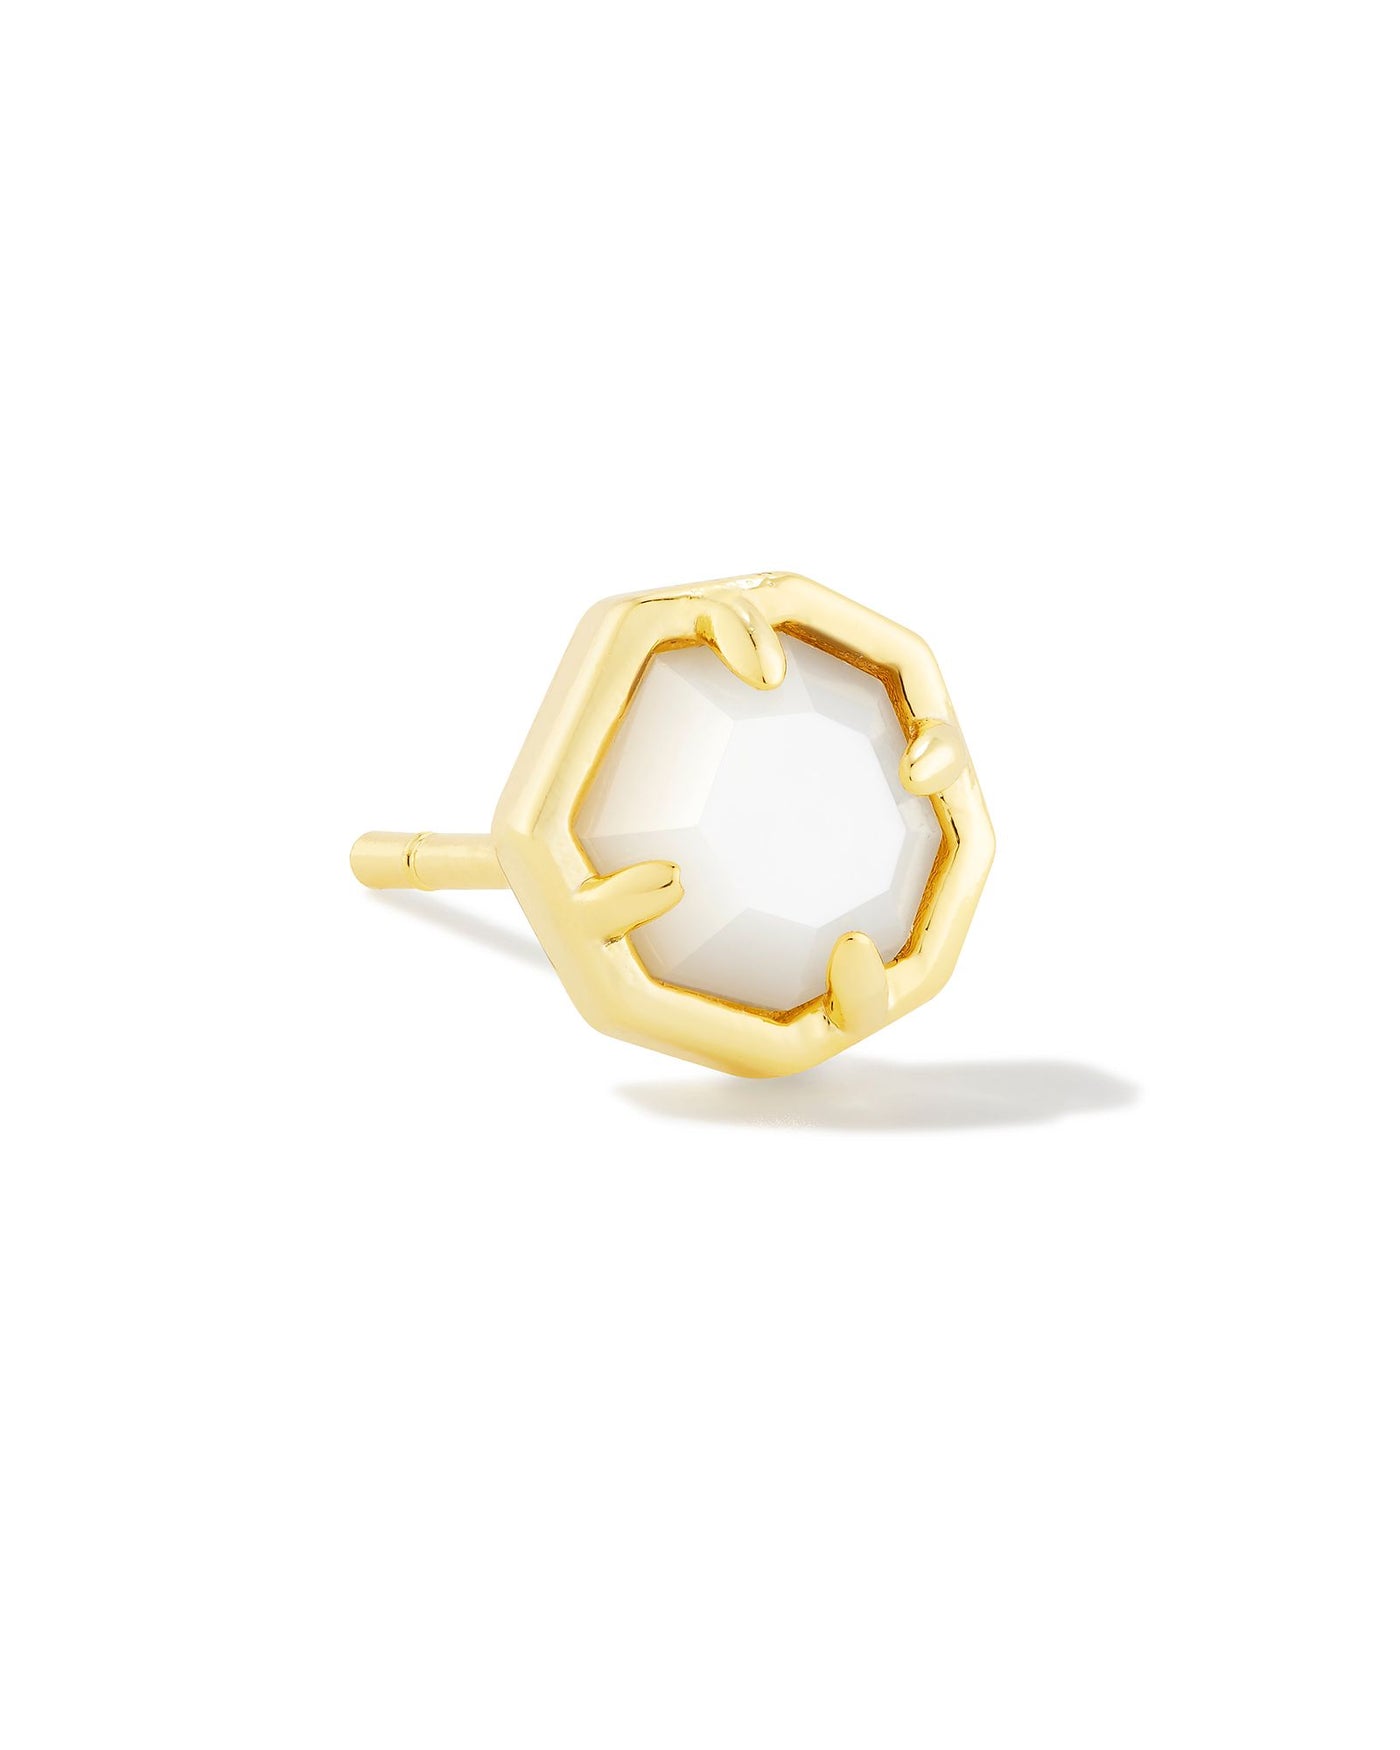 Kendra Scott Nola Single Stud Earring in Mother of Pear-Earrings-Kendra Scott-Market Street Nest, Fashionable Clothing, Shoes and Home Décor Located in Mabank, TX